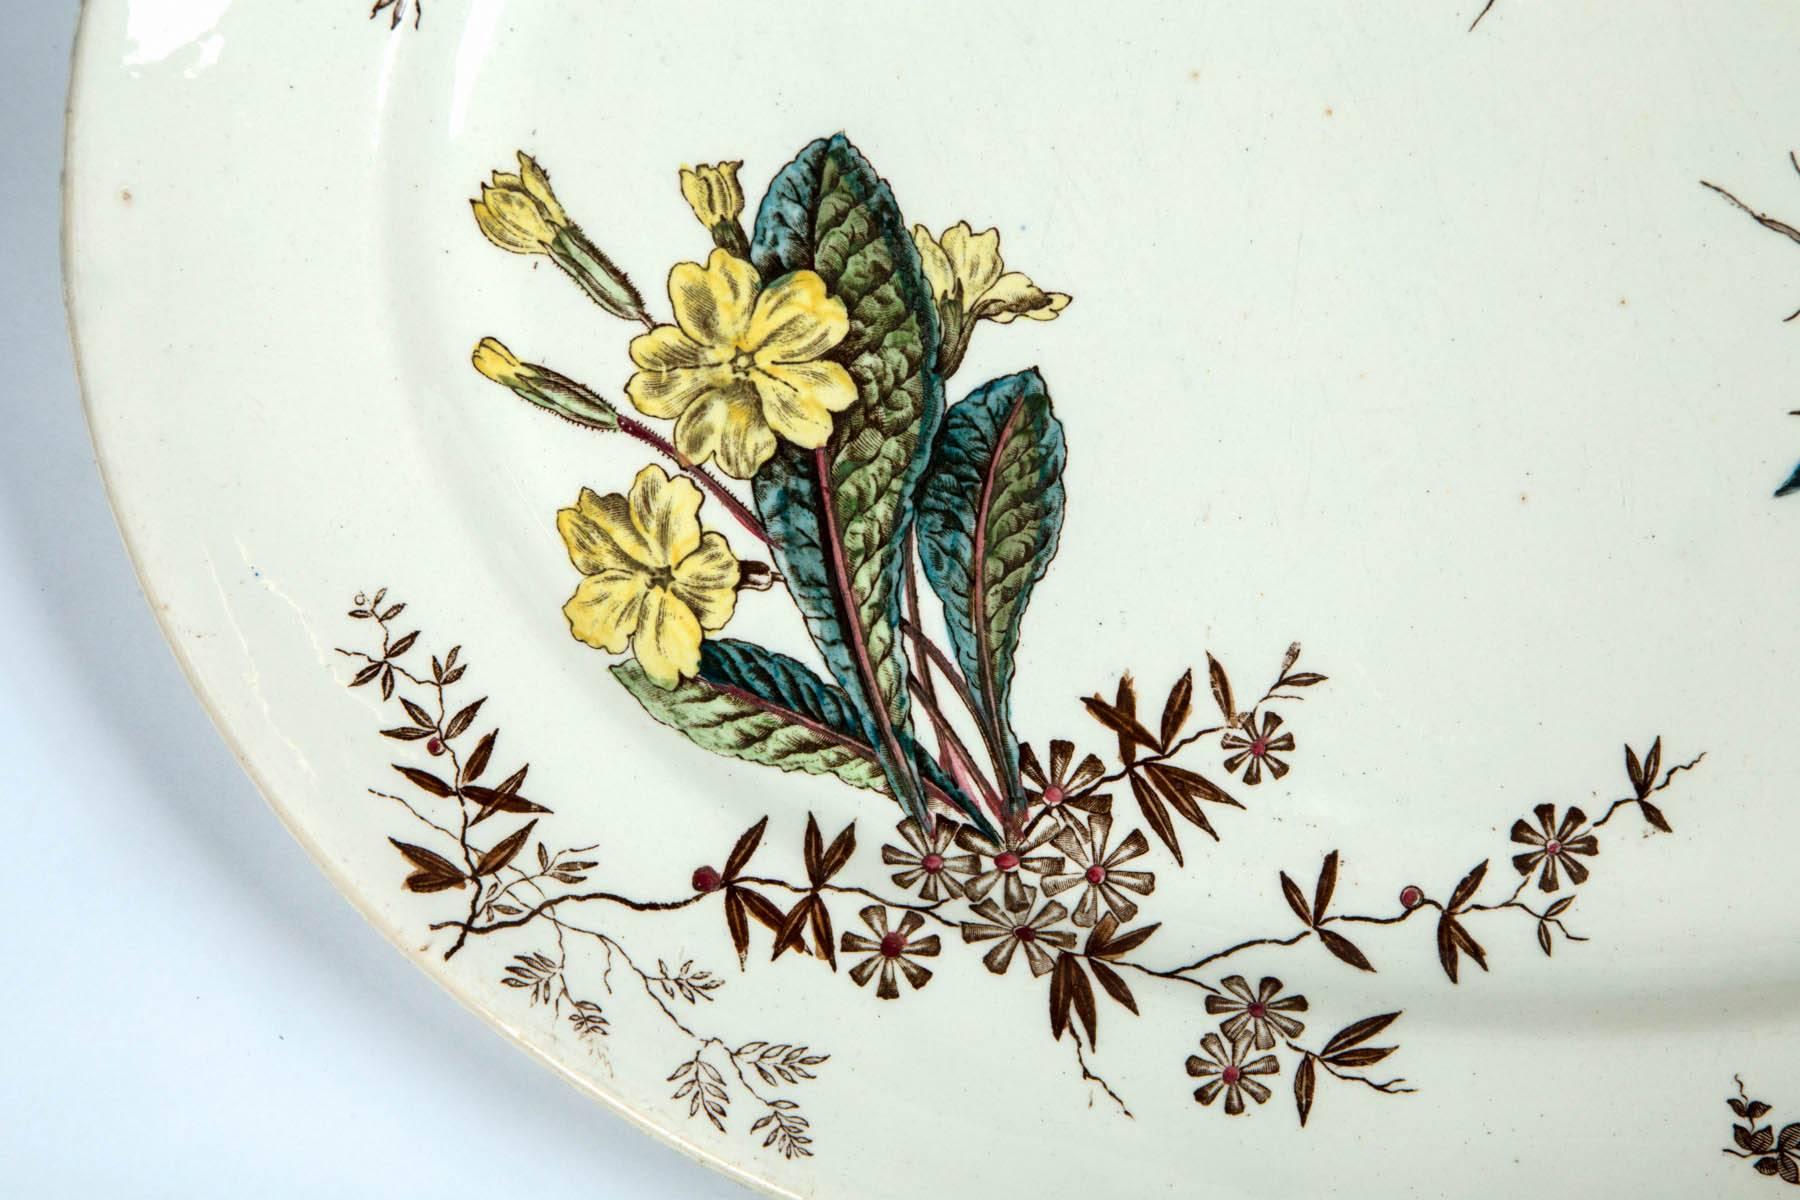 Antique ceramic serving platter, early 19th century. Delicate floral sprays in blues, yellows and greens, with brown foliate.